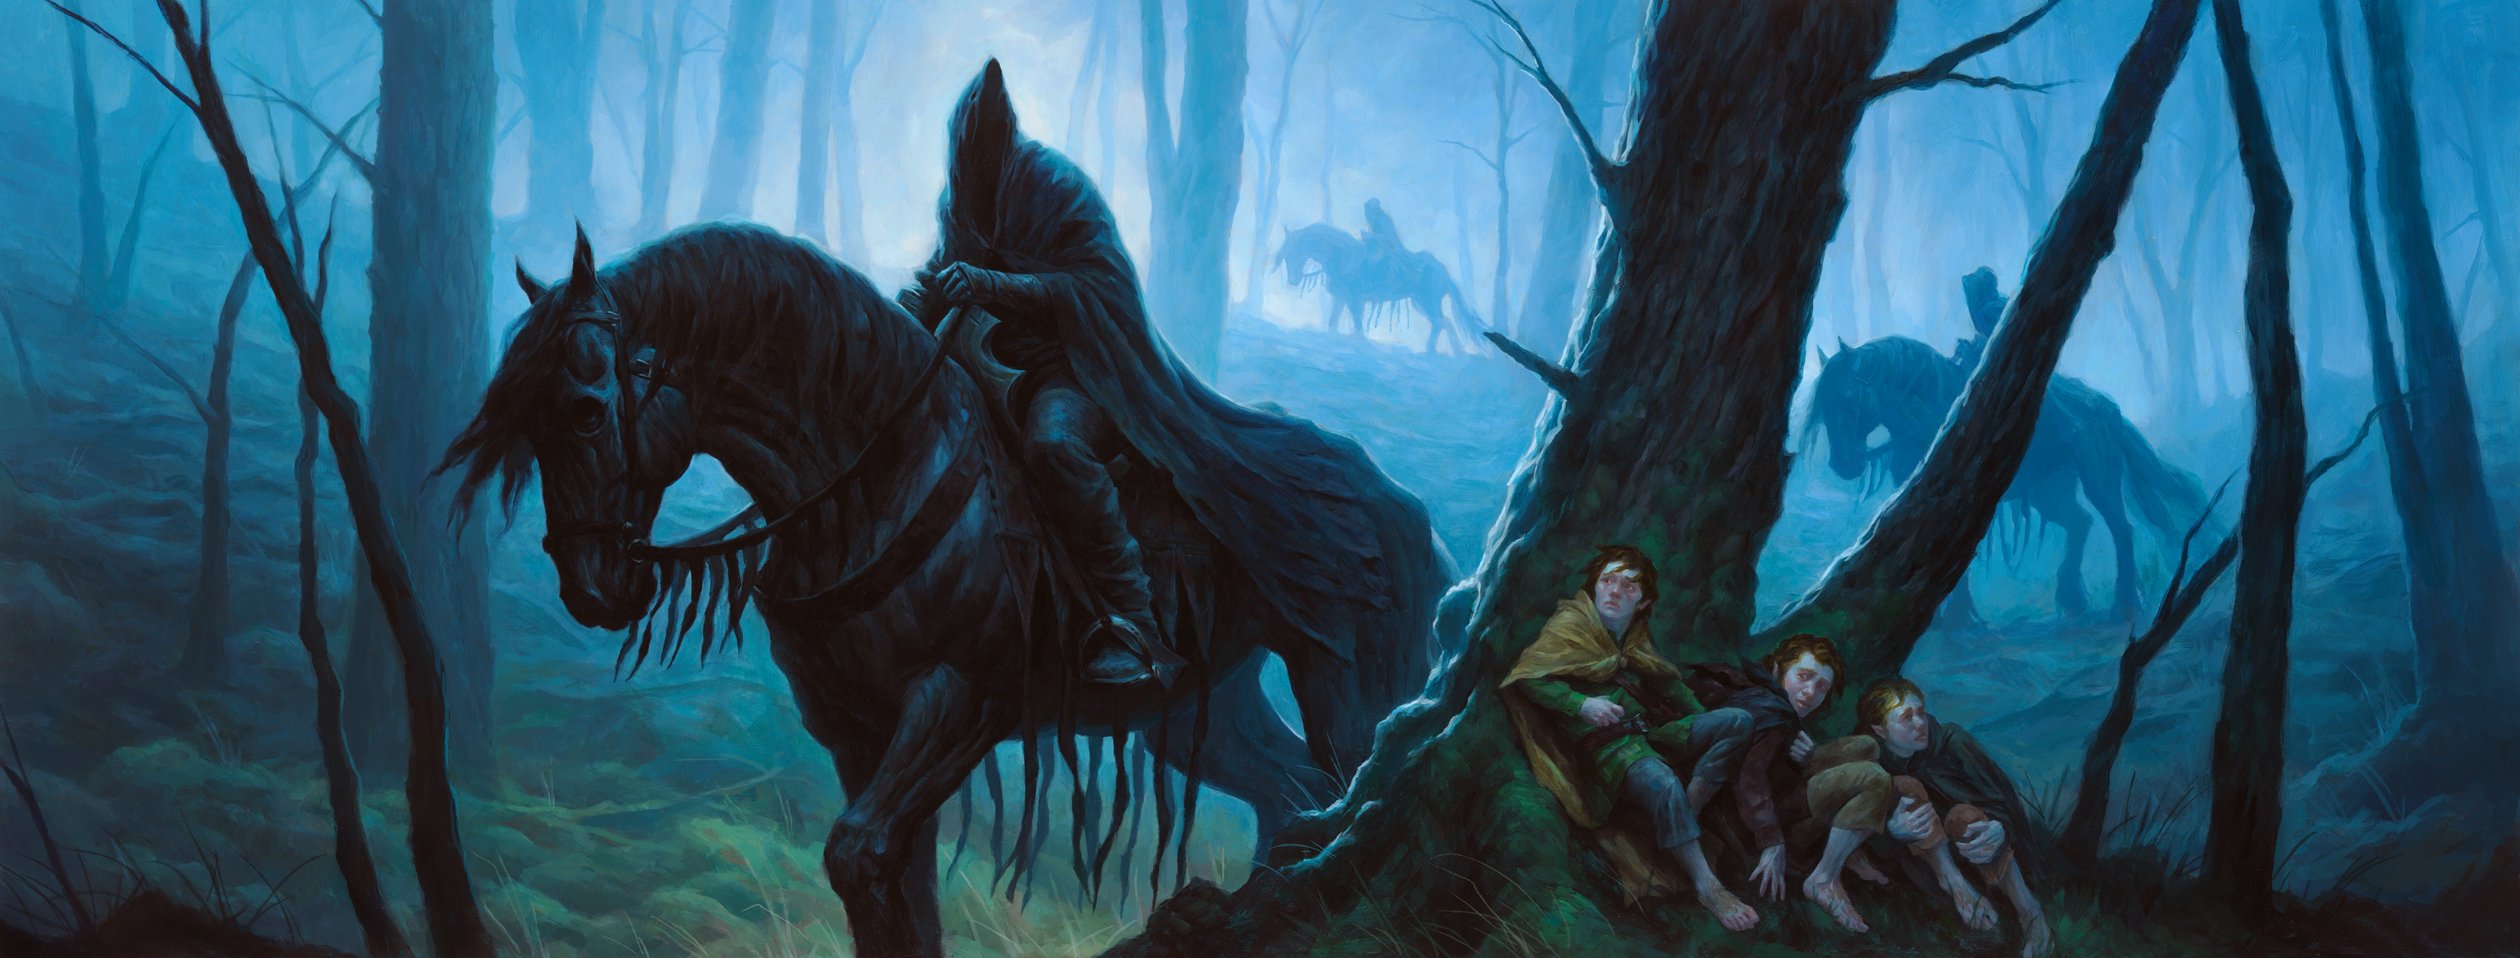 Artwork Fantasy Art The Lord Of The Rings Nazgul Hobbits J R R Tolkien 2520x958